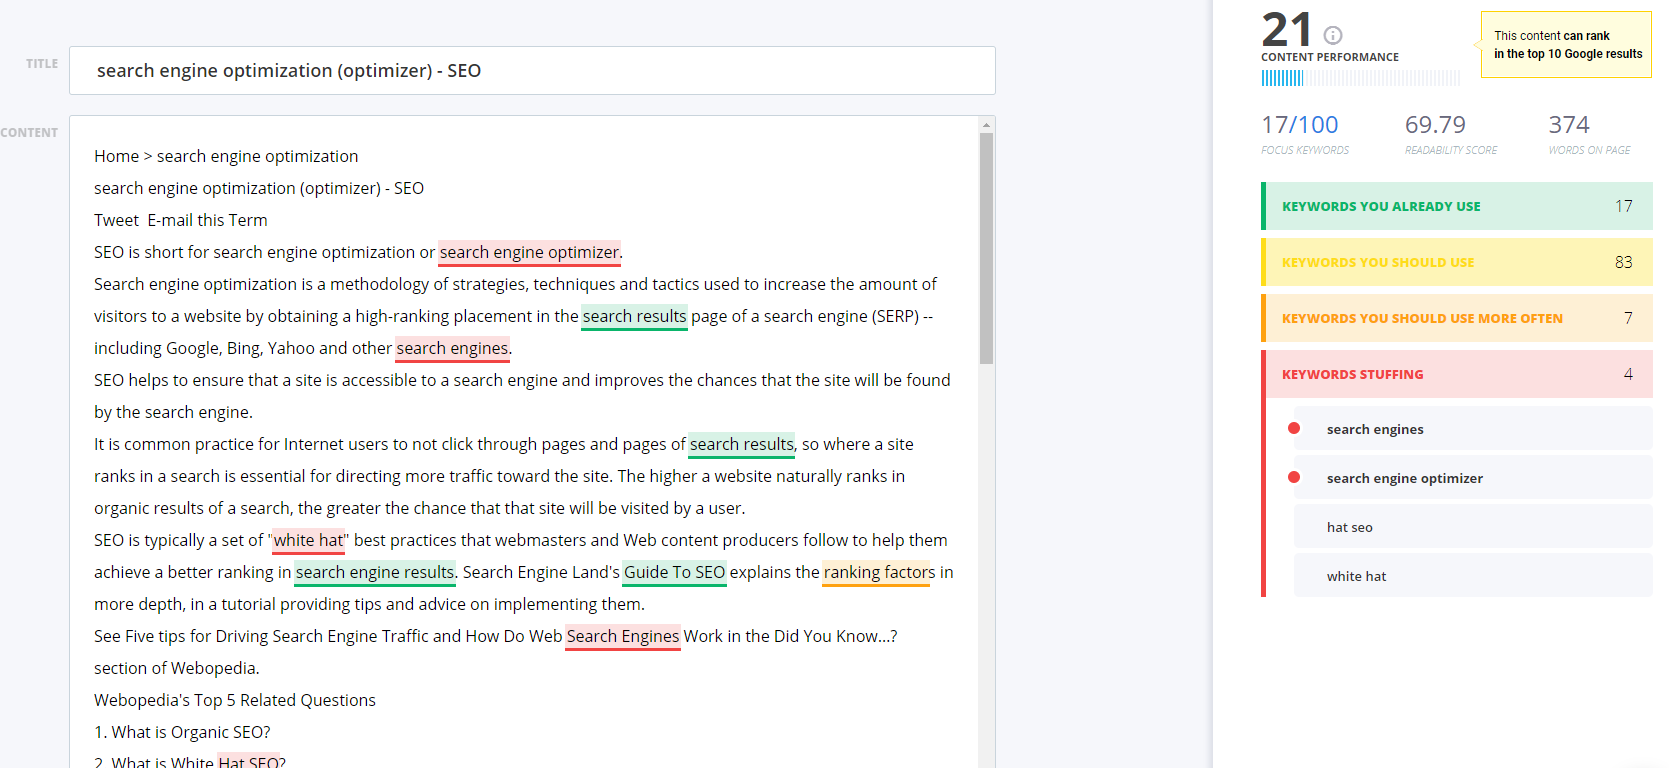 Example of keyword stuffing from Webopedia using a content optimization tool